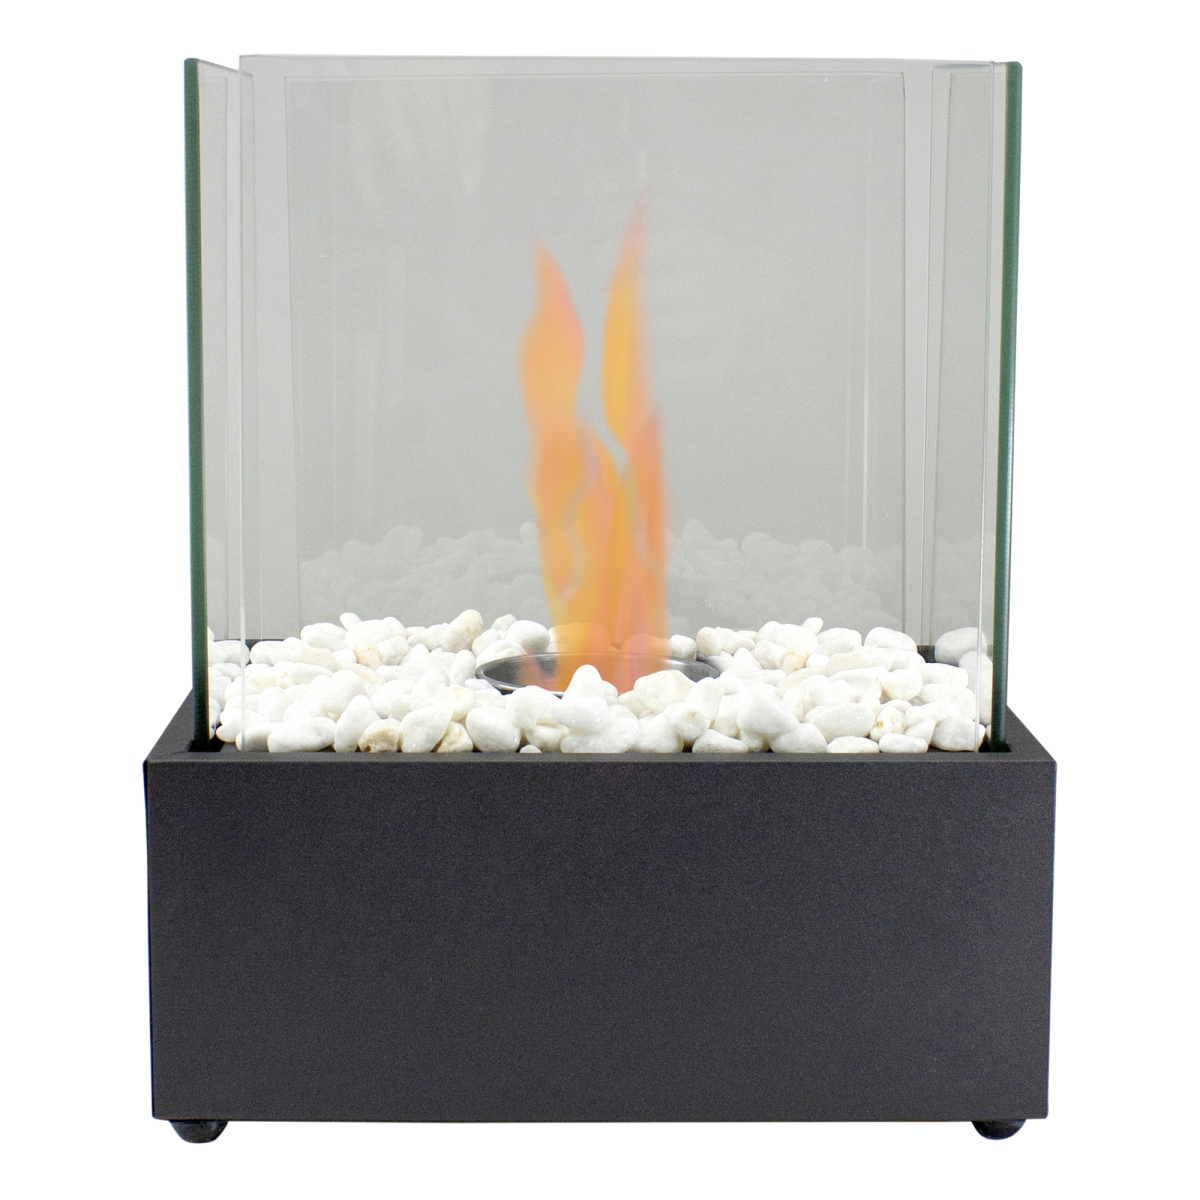 Picture of NorthLight 34808730 11.5 in. Bio Ethanol Ventless Portable Tabletop Fireplace with Flame Guard